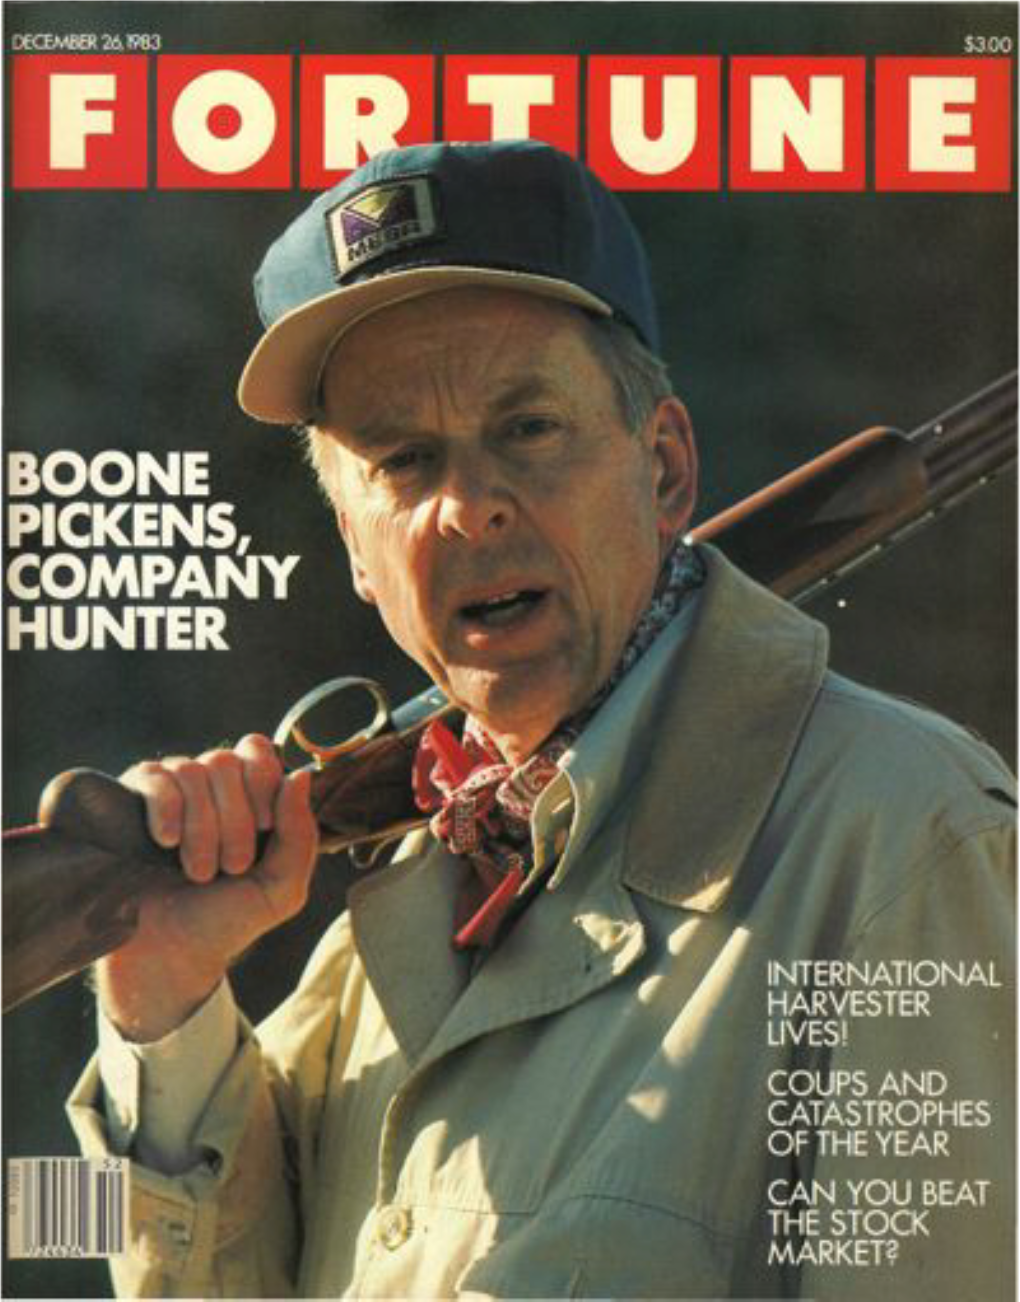 BOONE PICKENS, COMPANY HUNTER • "Who Is Pickens Anyway?" Asks Harold Hammer